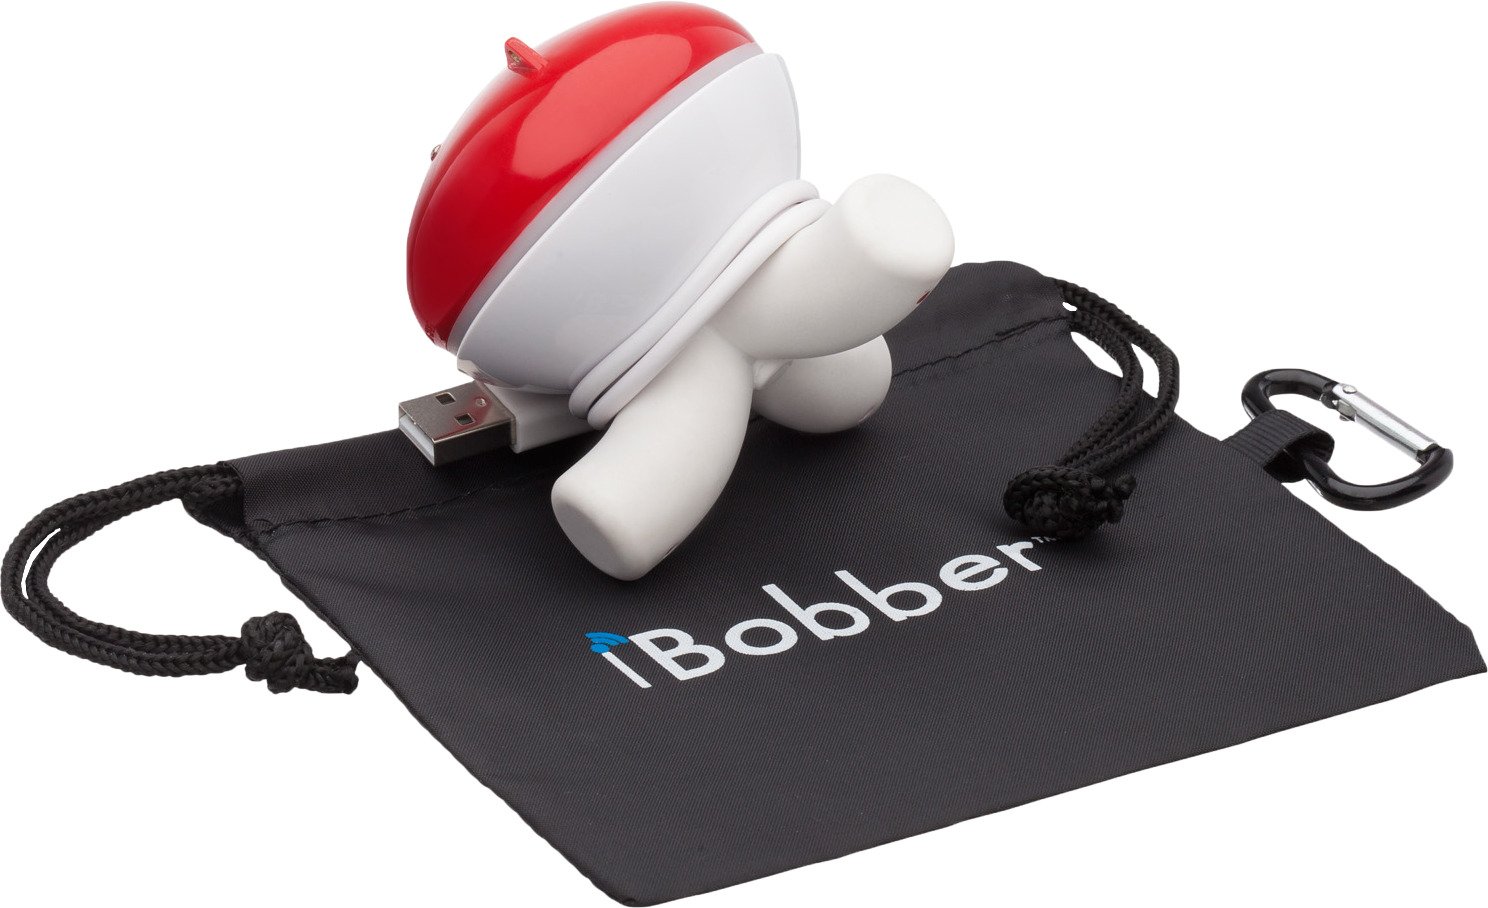 iBobber Castable Fishfinder from ReelSonar - Great help for any fisherman